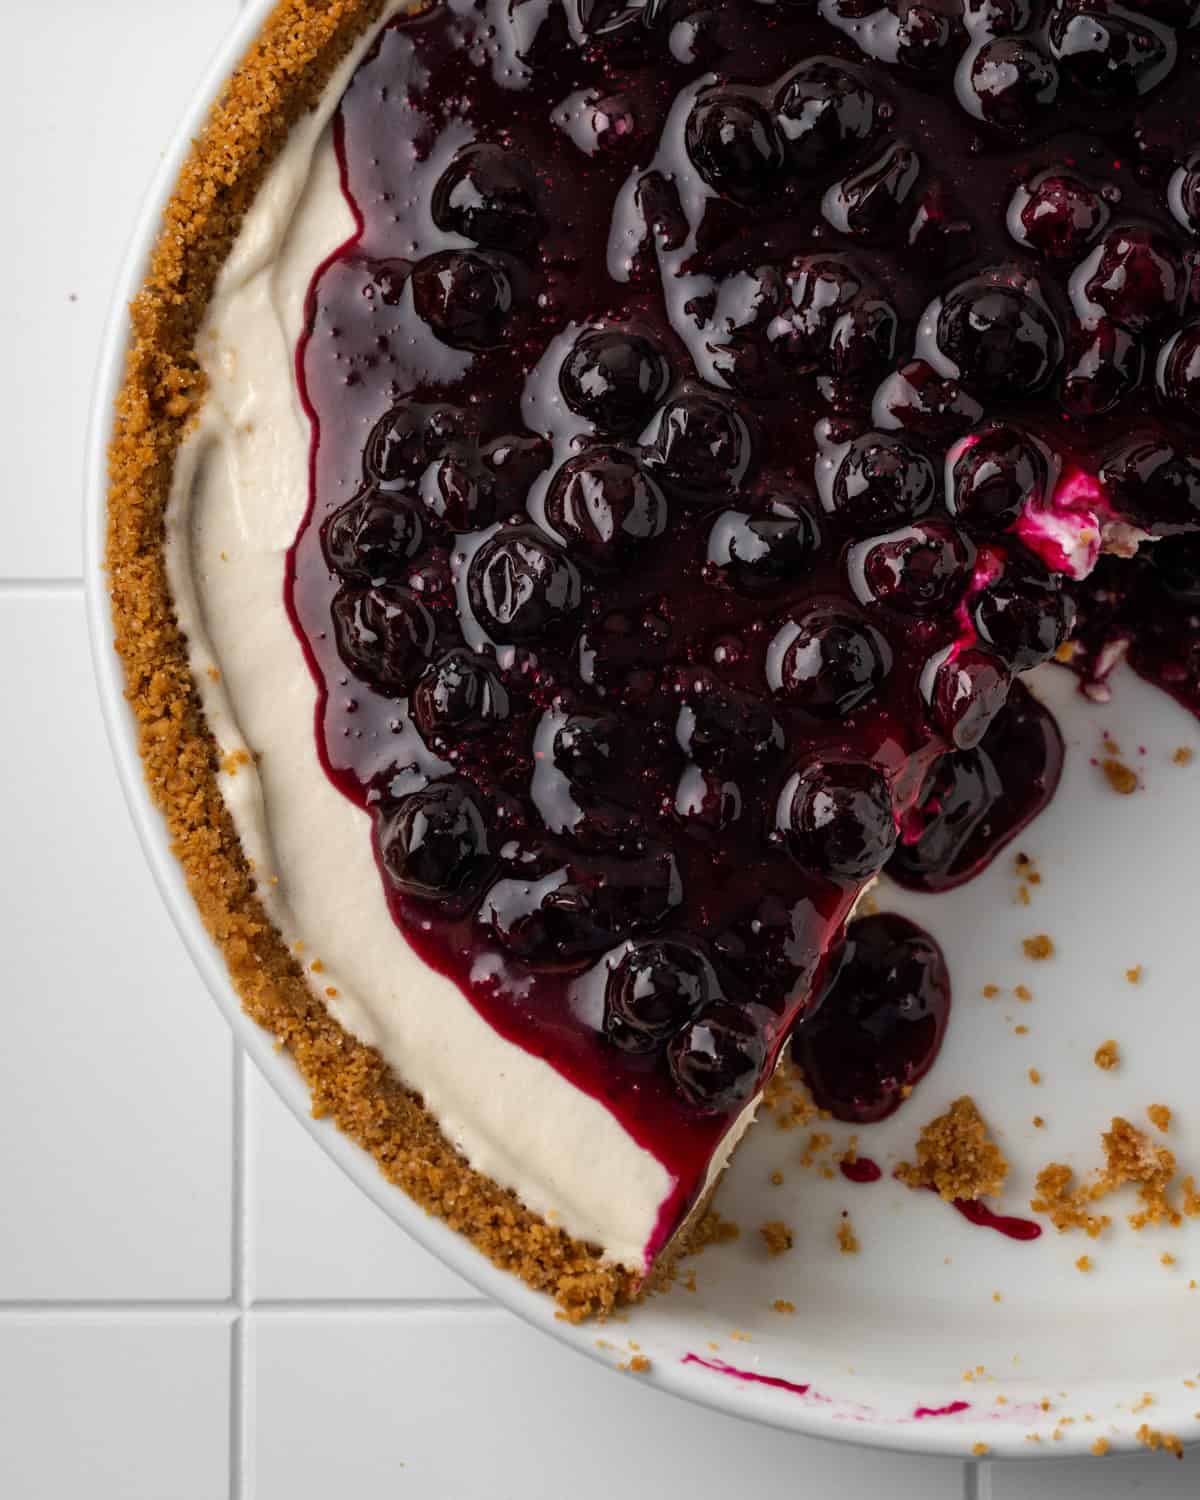 A gluten free no bake cheesecake topped with homemade blueberry sauce.